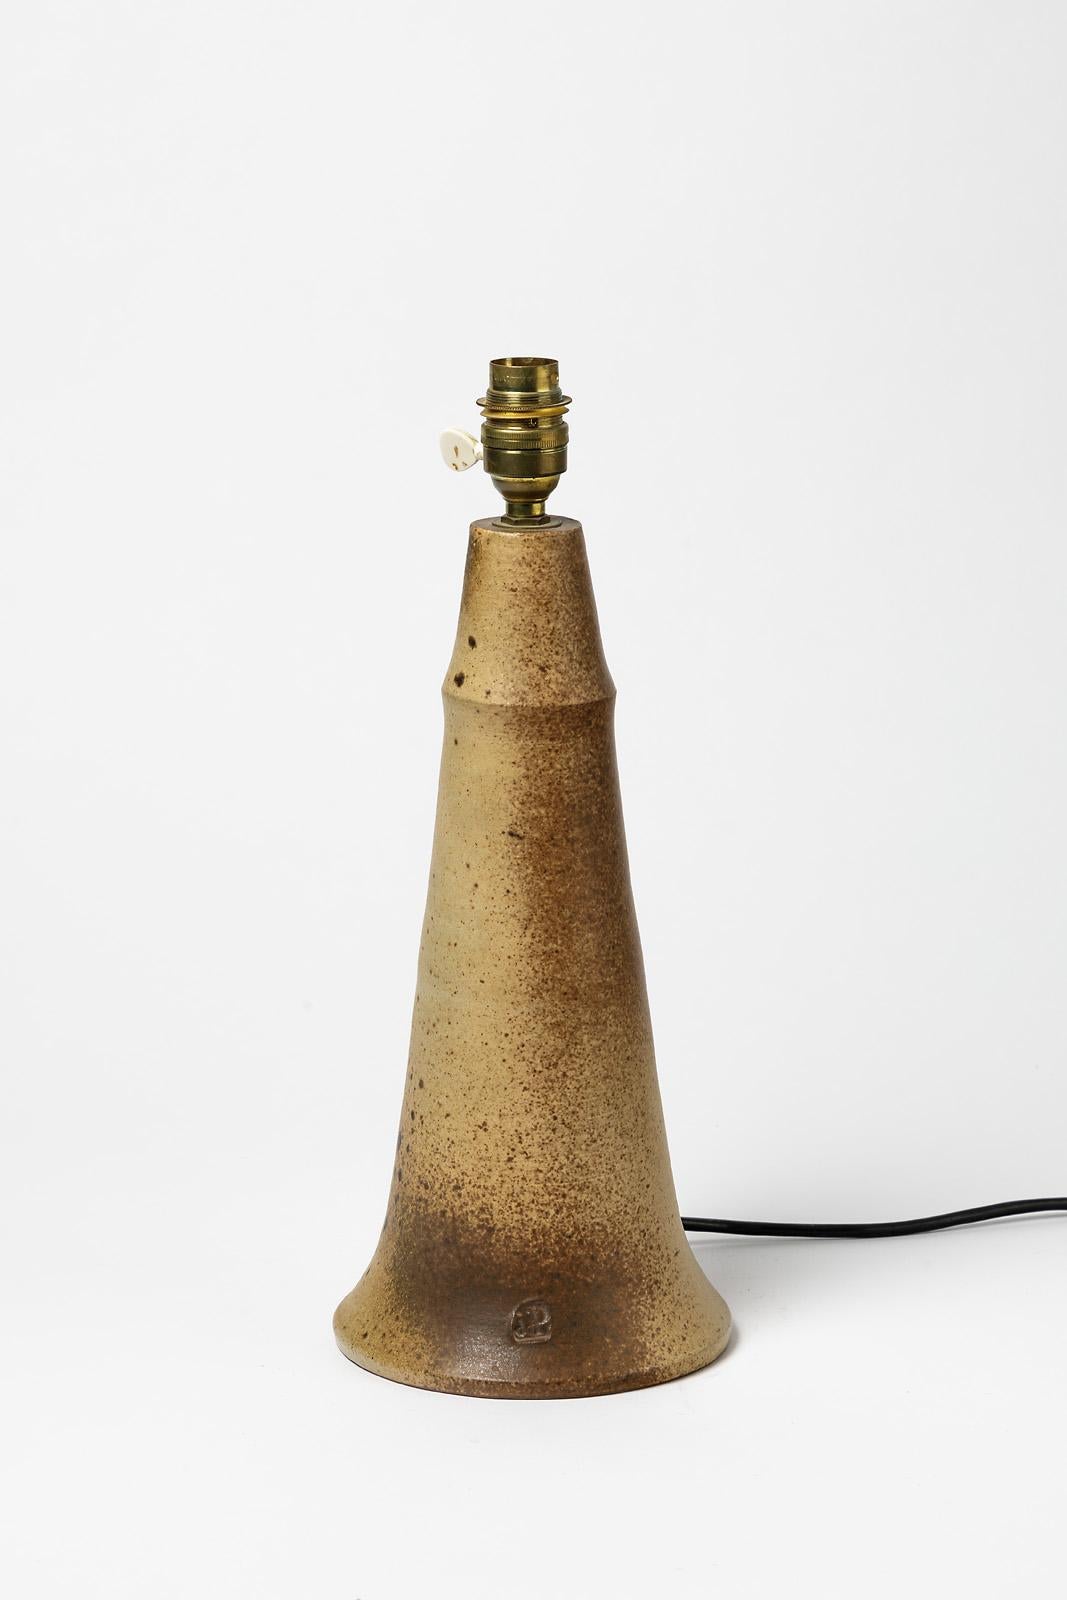 French 20th Century Design Ceramic Table Lamp by JJ Prolongeau circa 1970 Brown Color For Sale